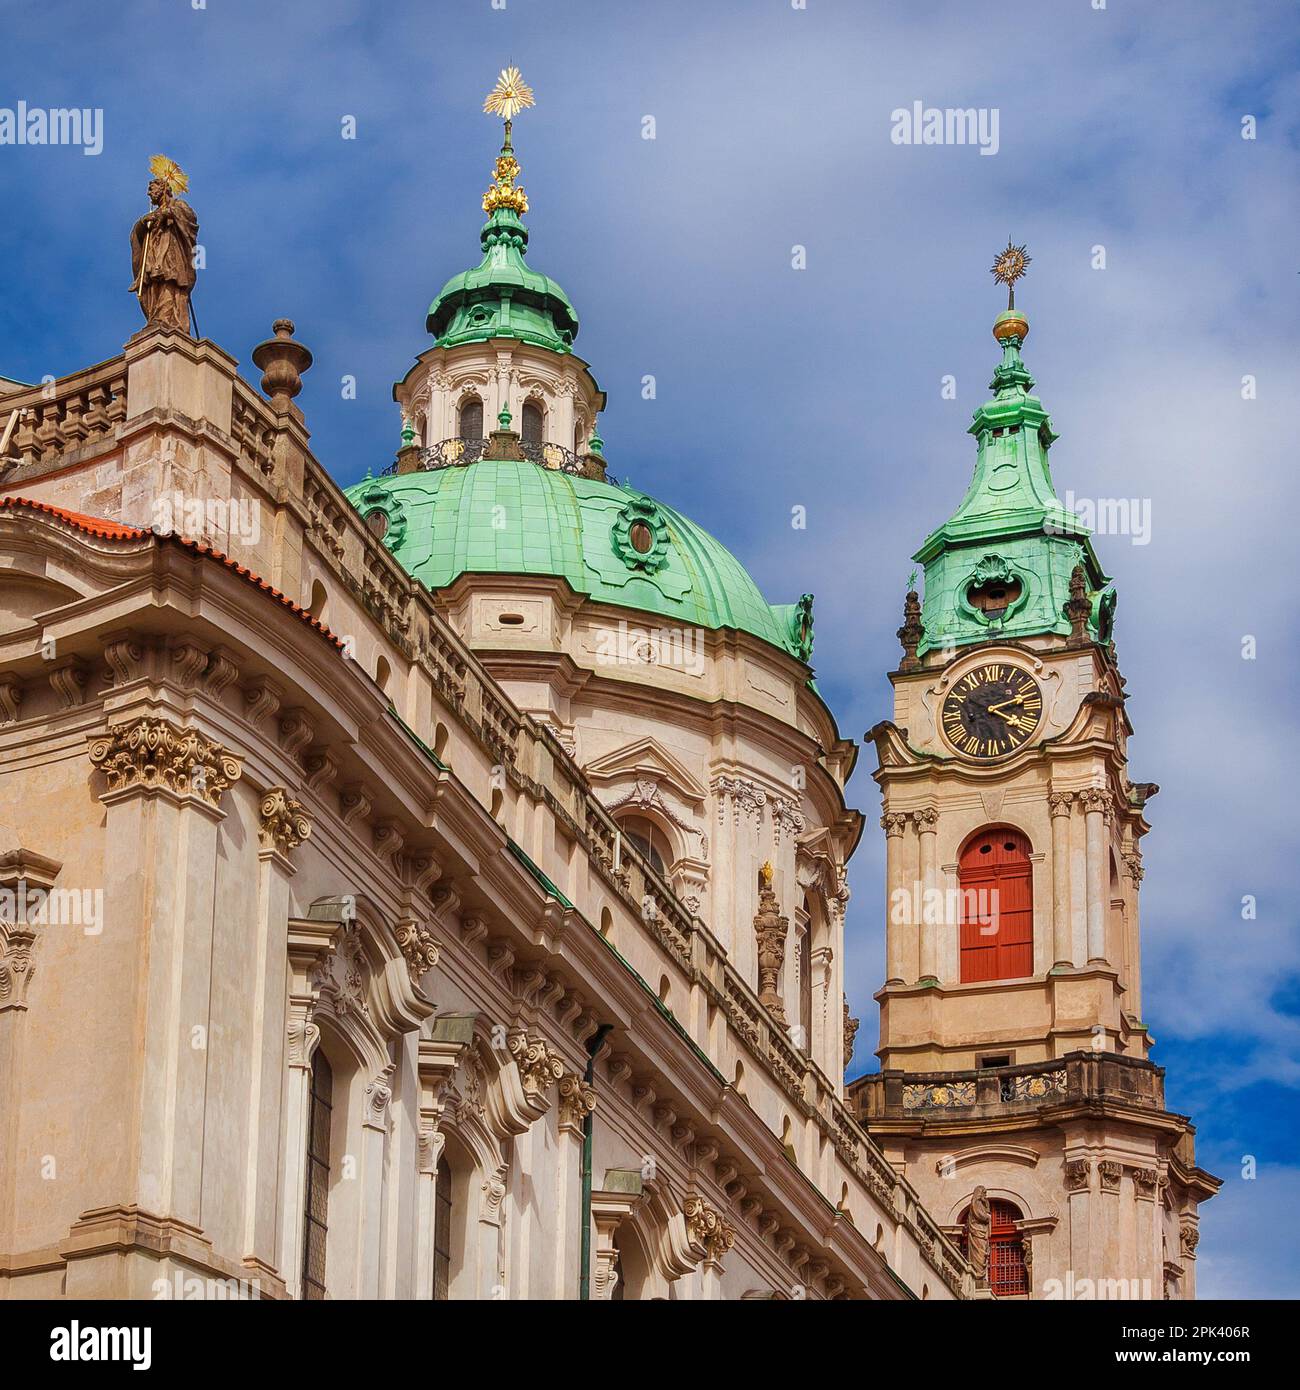 Baroque art and architecture in Prague. Church of Saint Nicholas beautiful dome and clock tower erected in 18th centuty in Mala Strana district Stock Photo